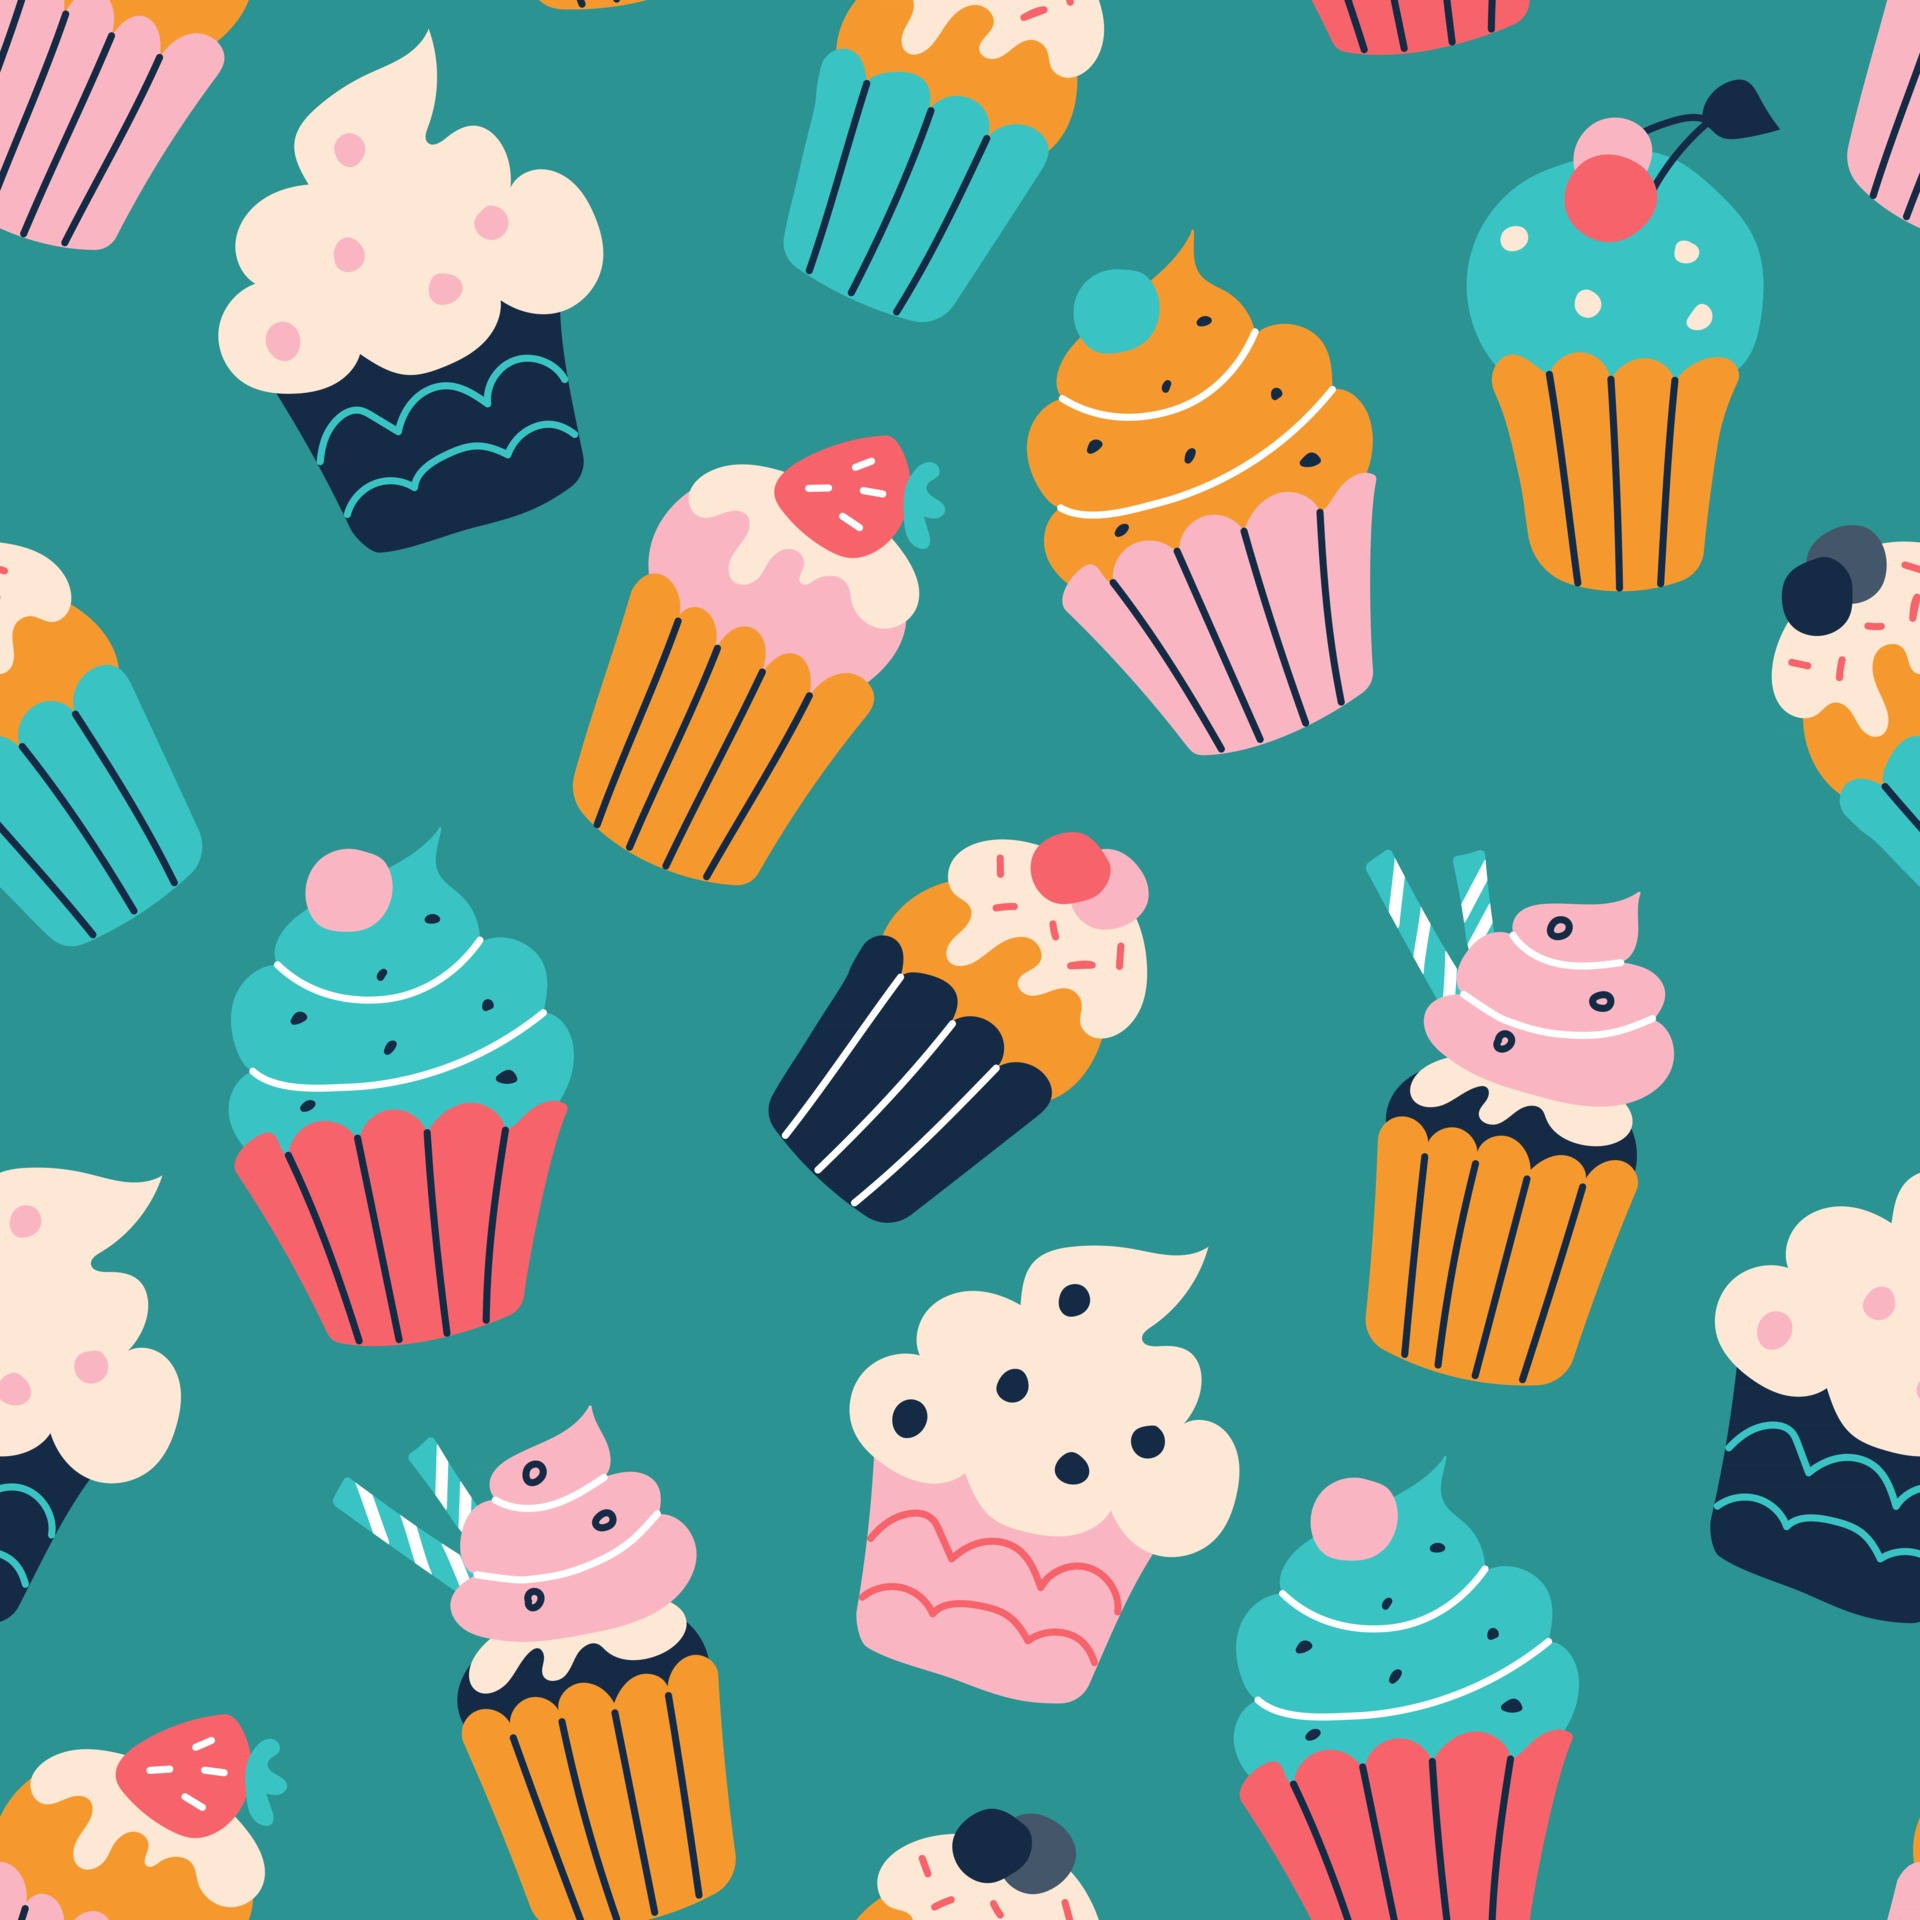 320 Cupcake HD Wallpapers and Backgrounds